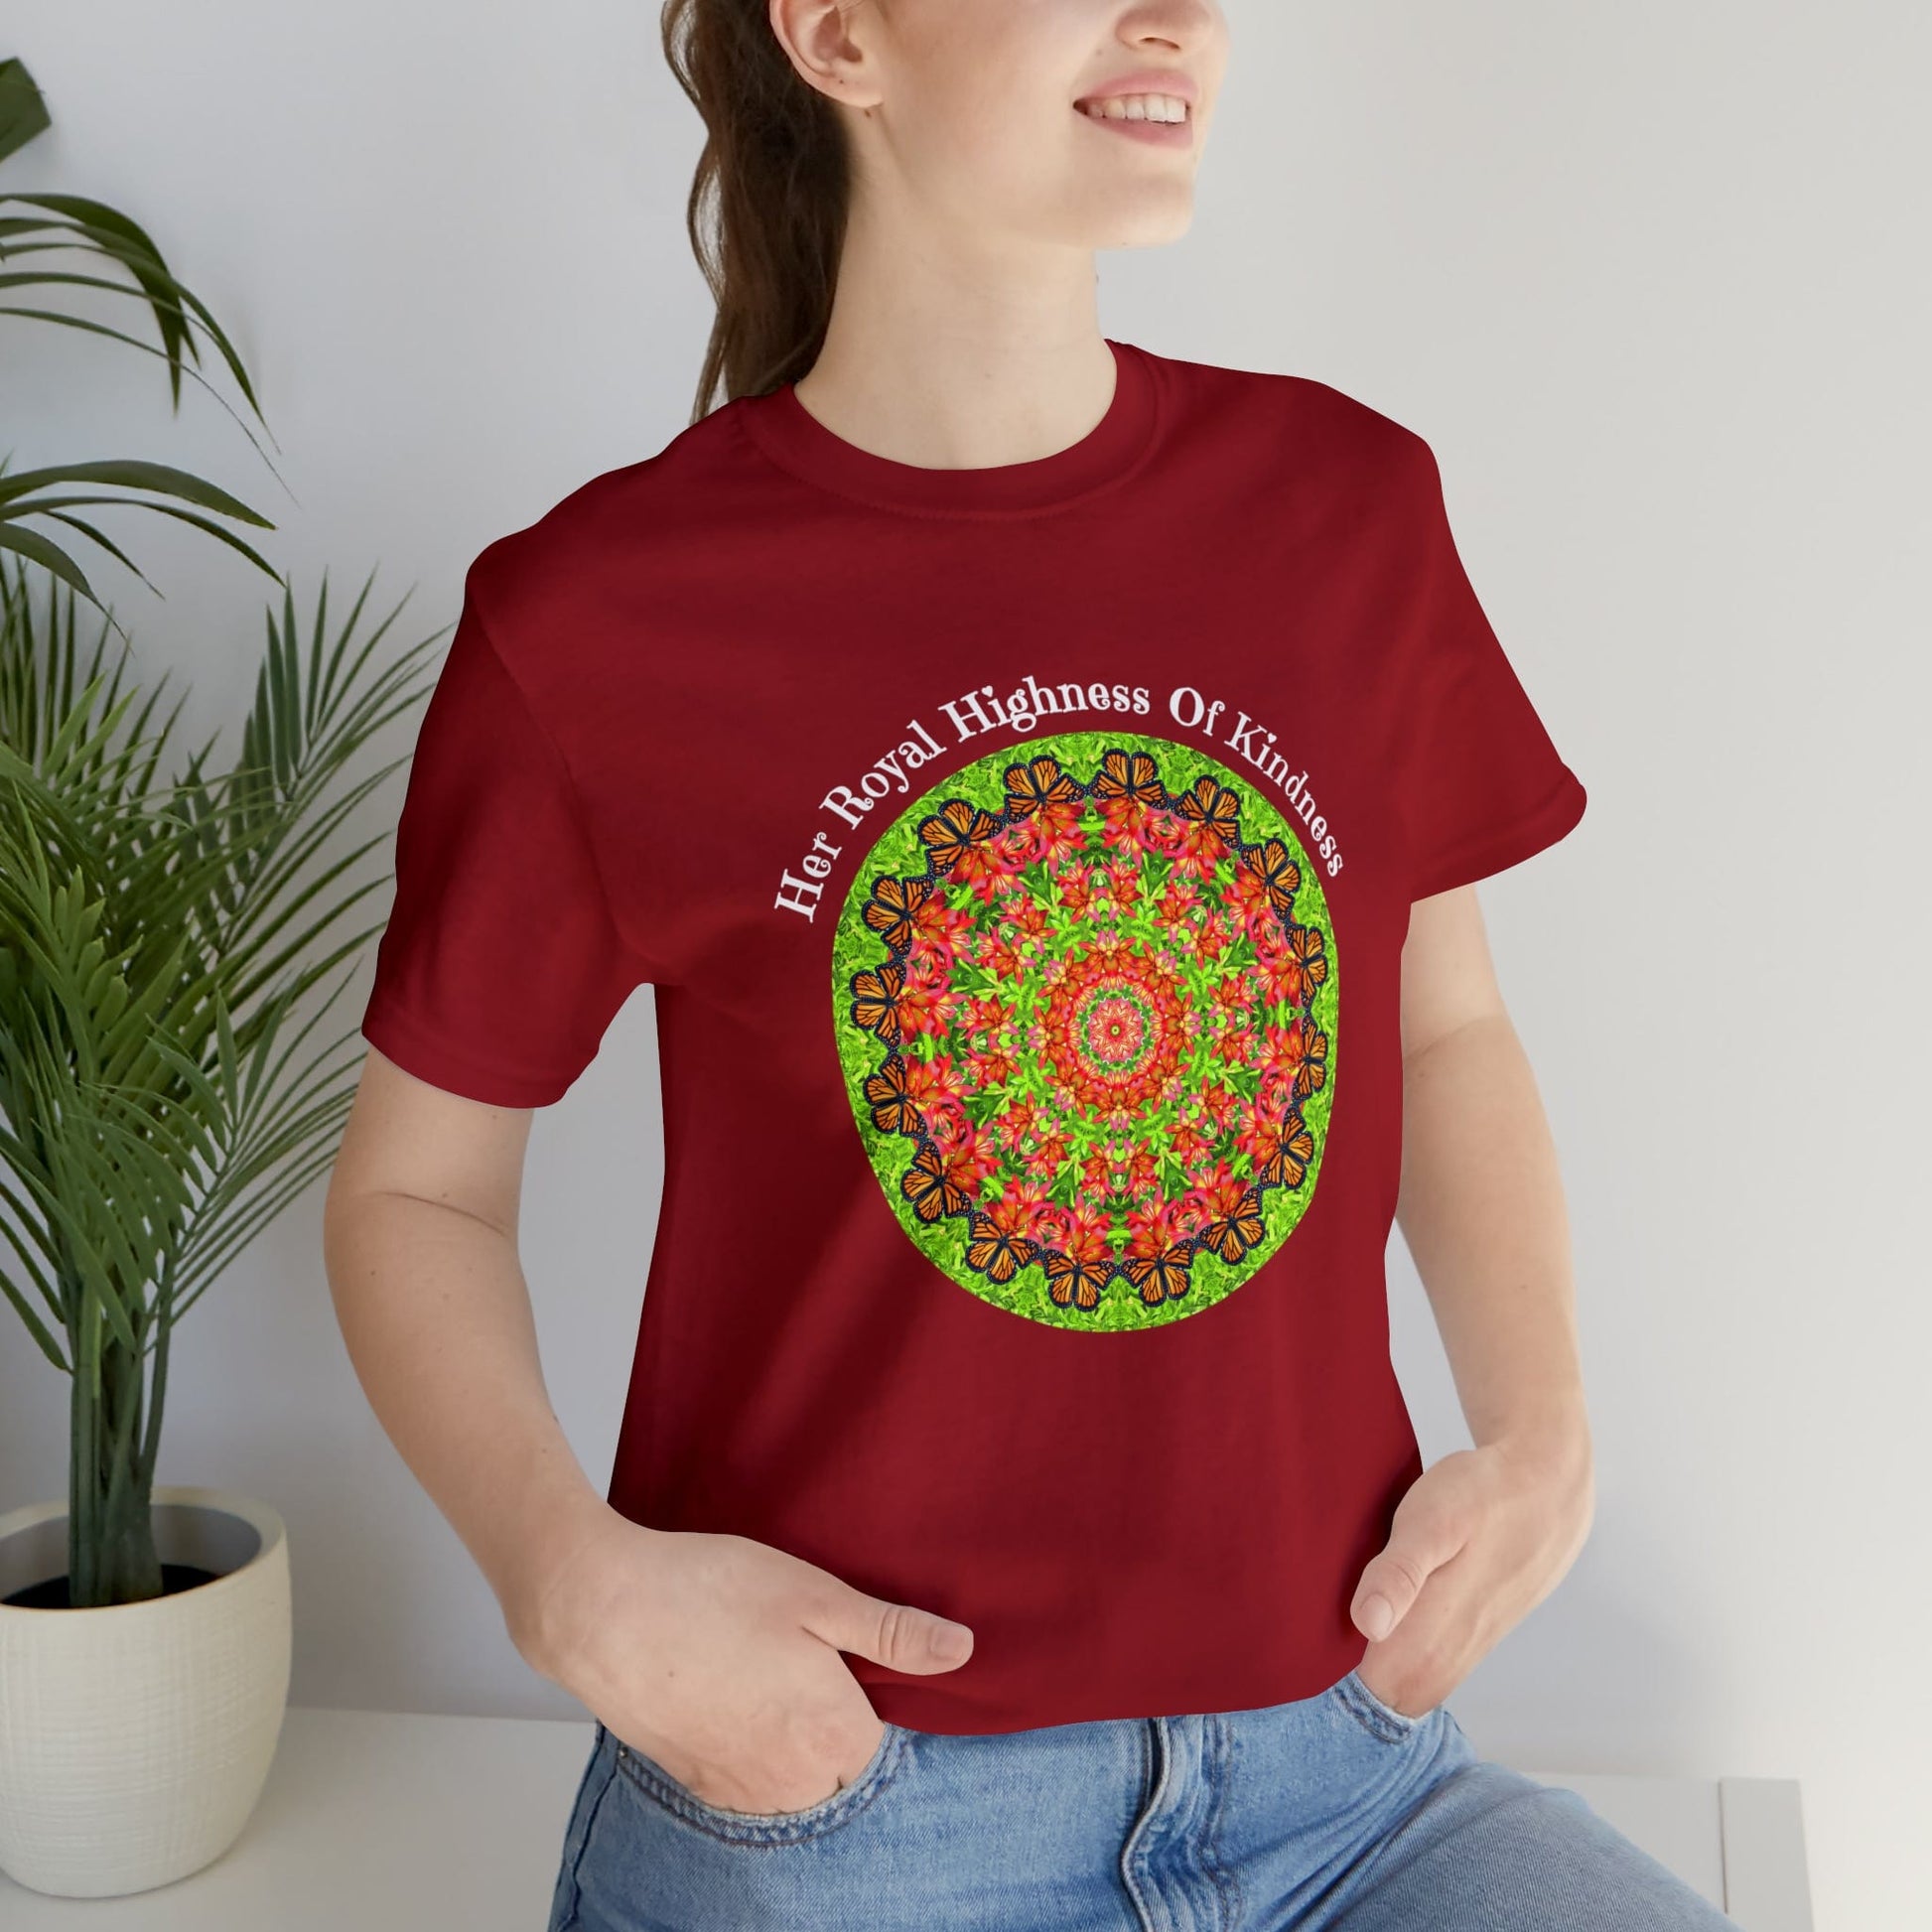 All Day Kindness Matters Shirts  - Cool Butterfly Art Shirts Infused With Nature - Her Royal Highness Of Kindness canvas red